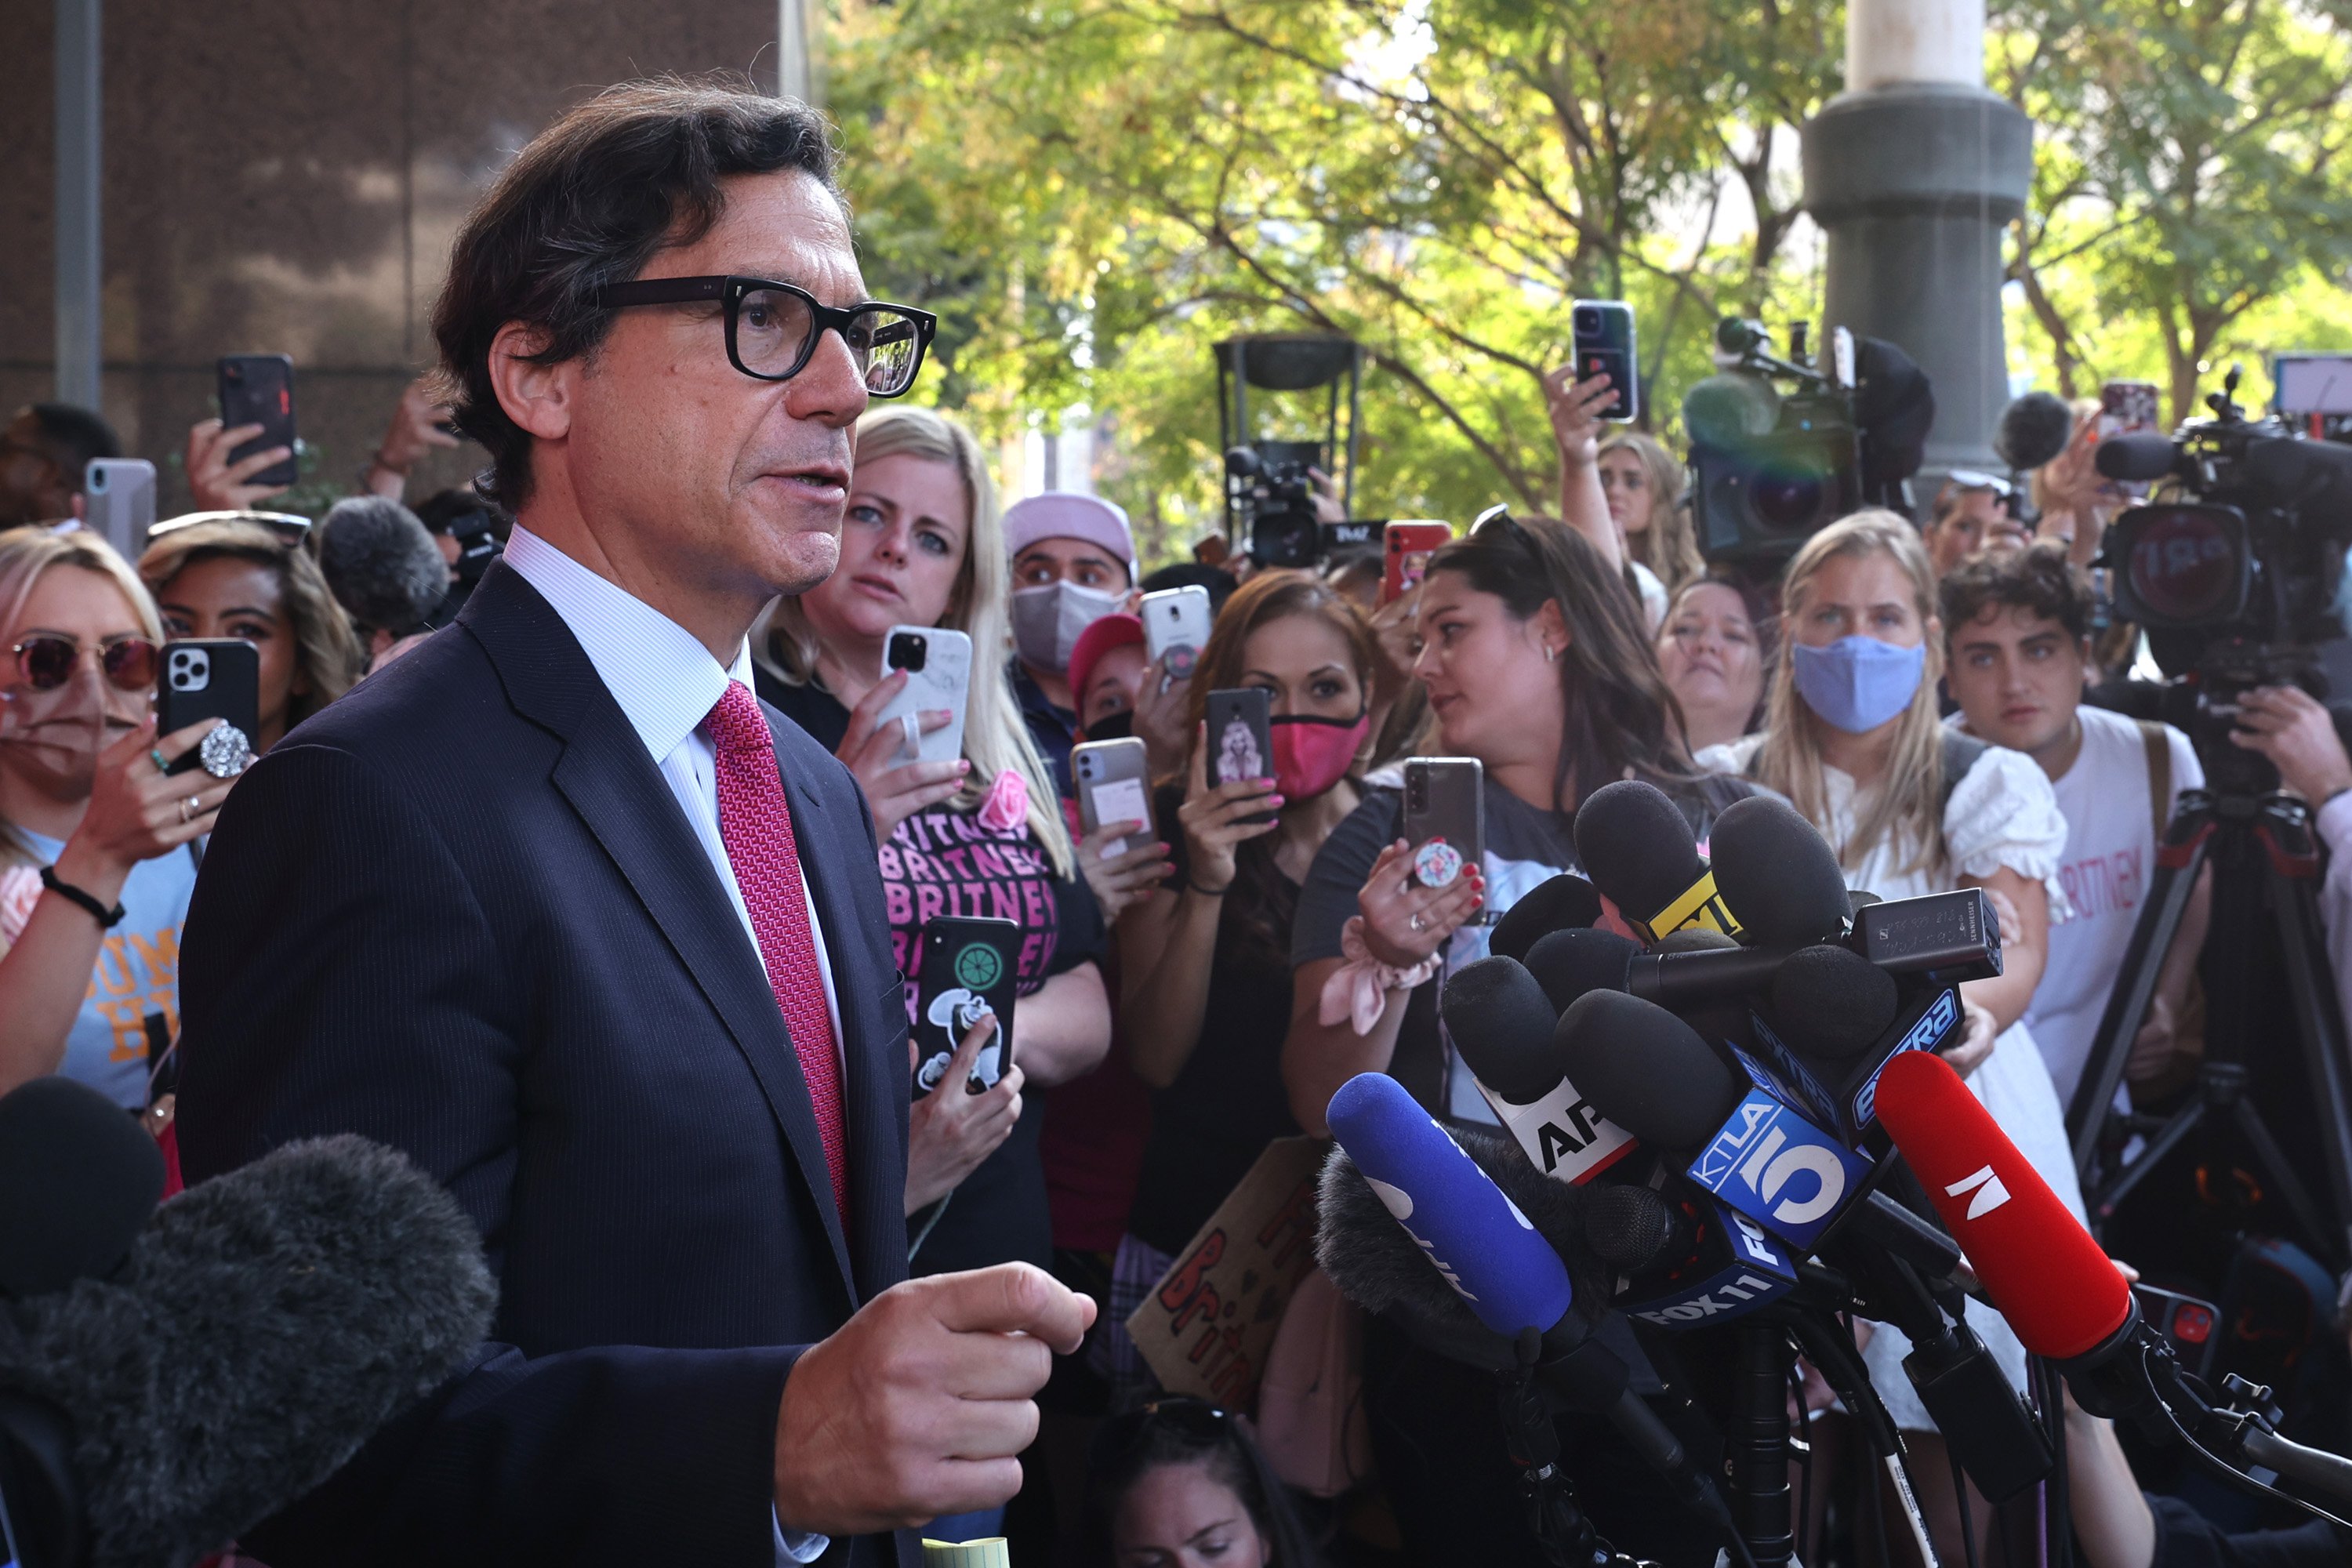 Britney Spears' attorney Mathew Rosengart speaking to the press at the Stanley Mosk Courthouse in Los Angeles, California | Photo: Getty Images